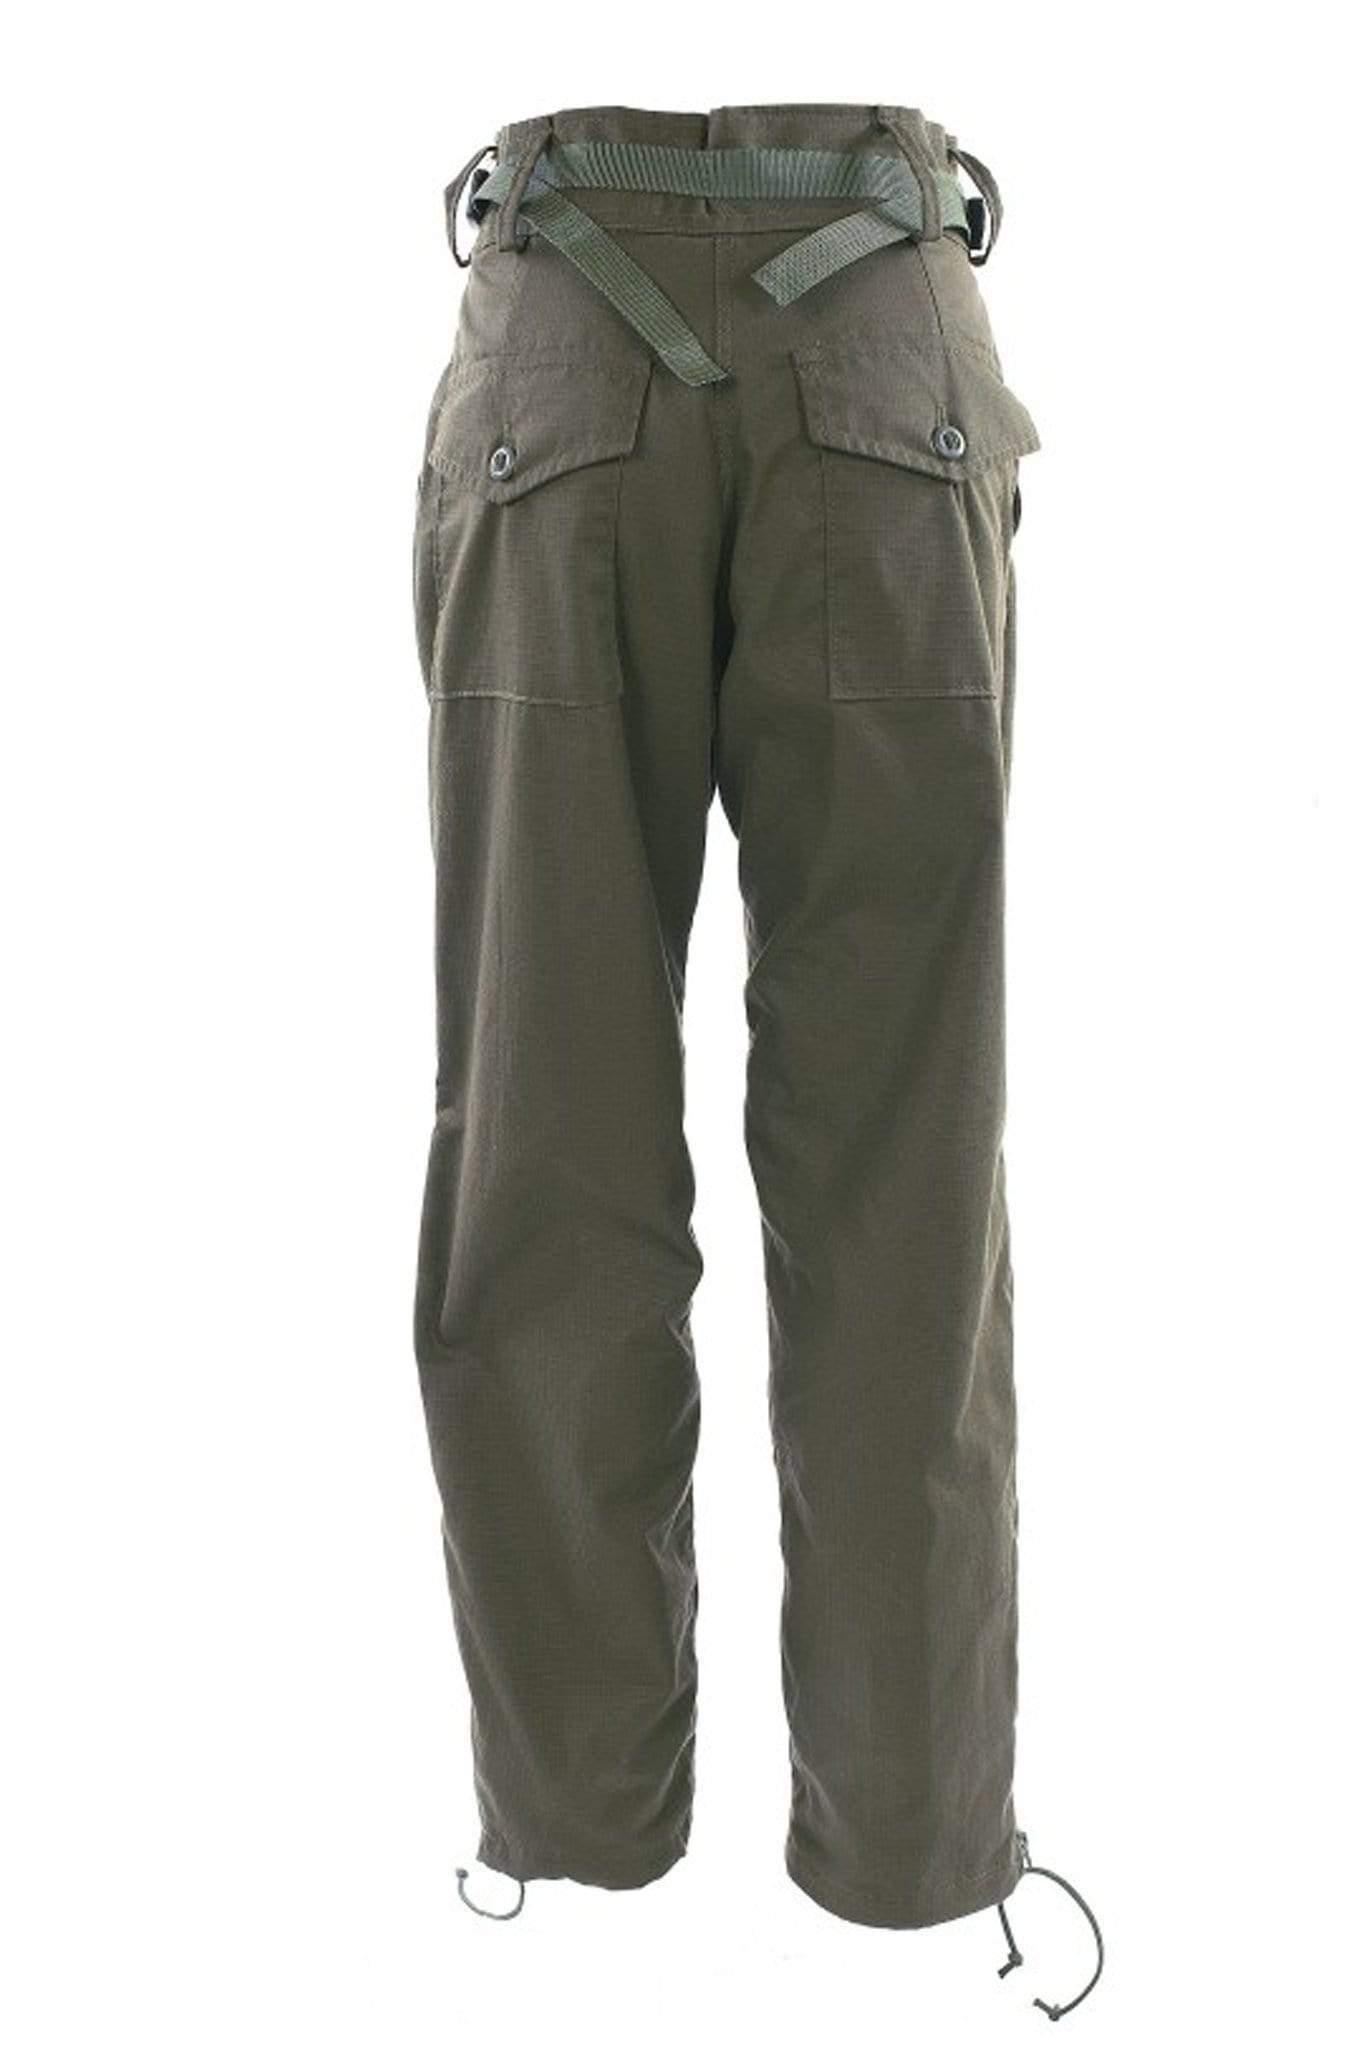 Fortis Women's Falkland Waterproof Over Trousers